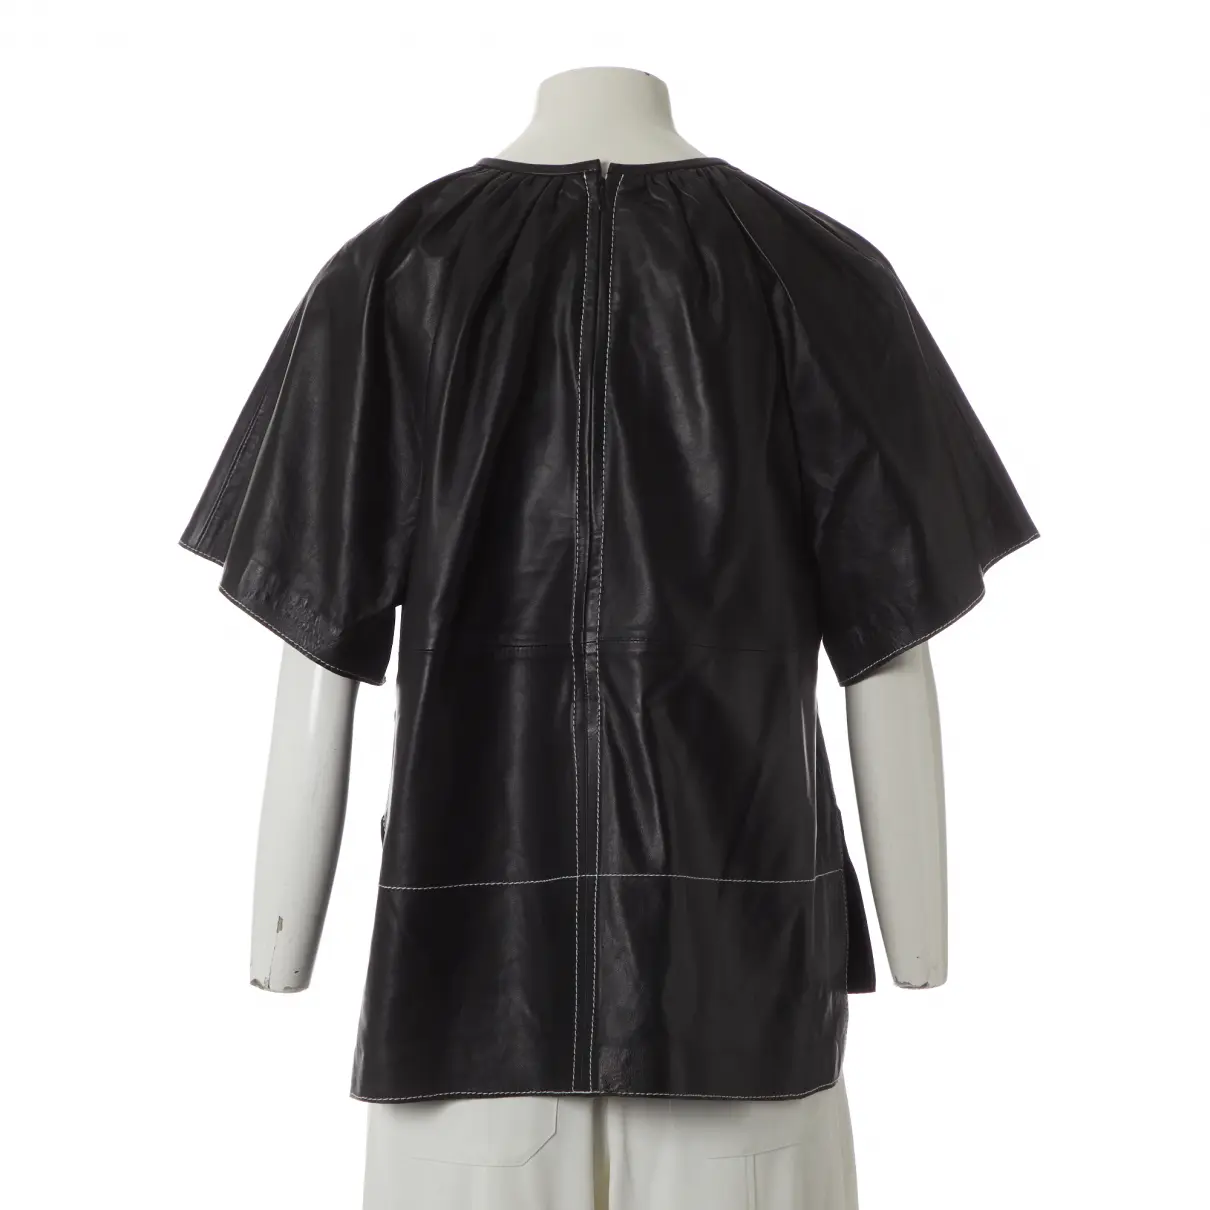 Buy Stand studio Leather blouse online